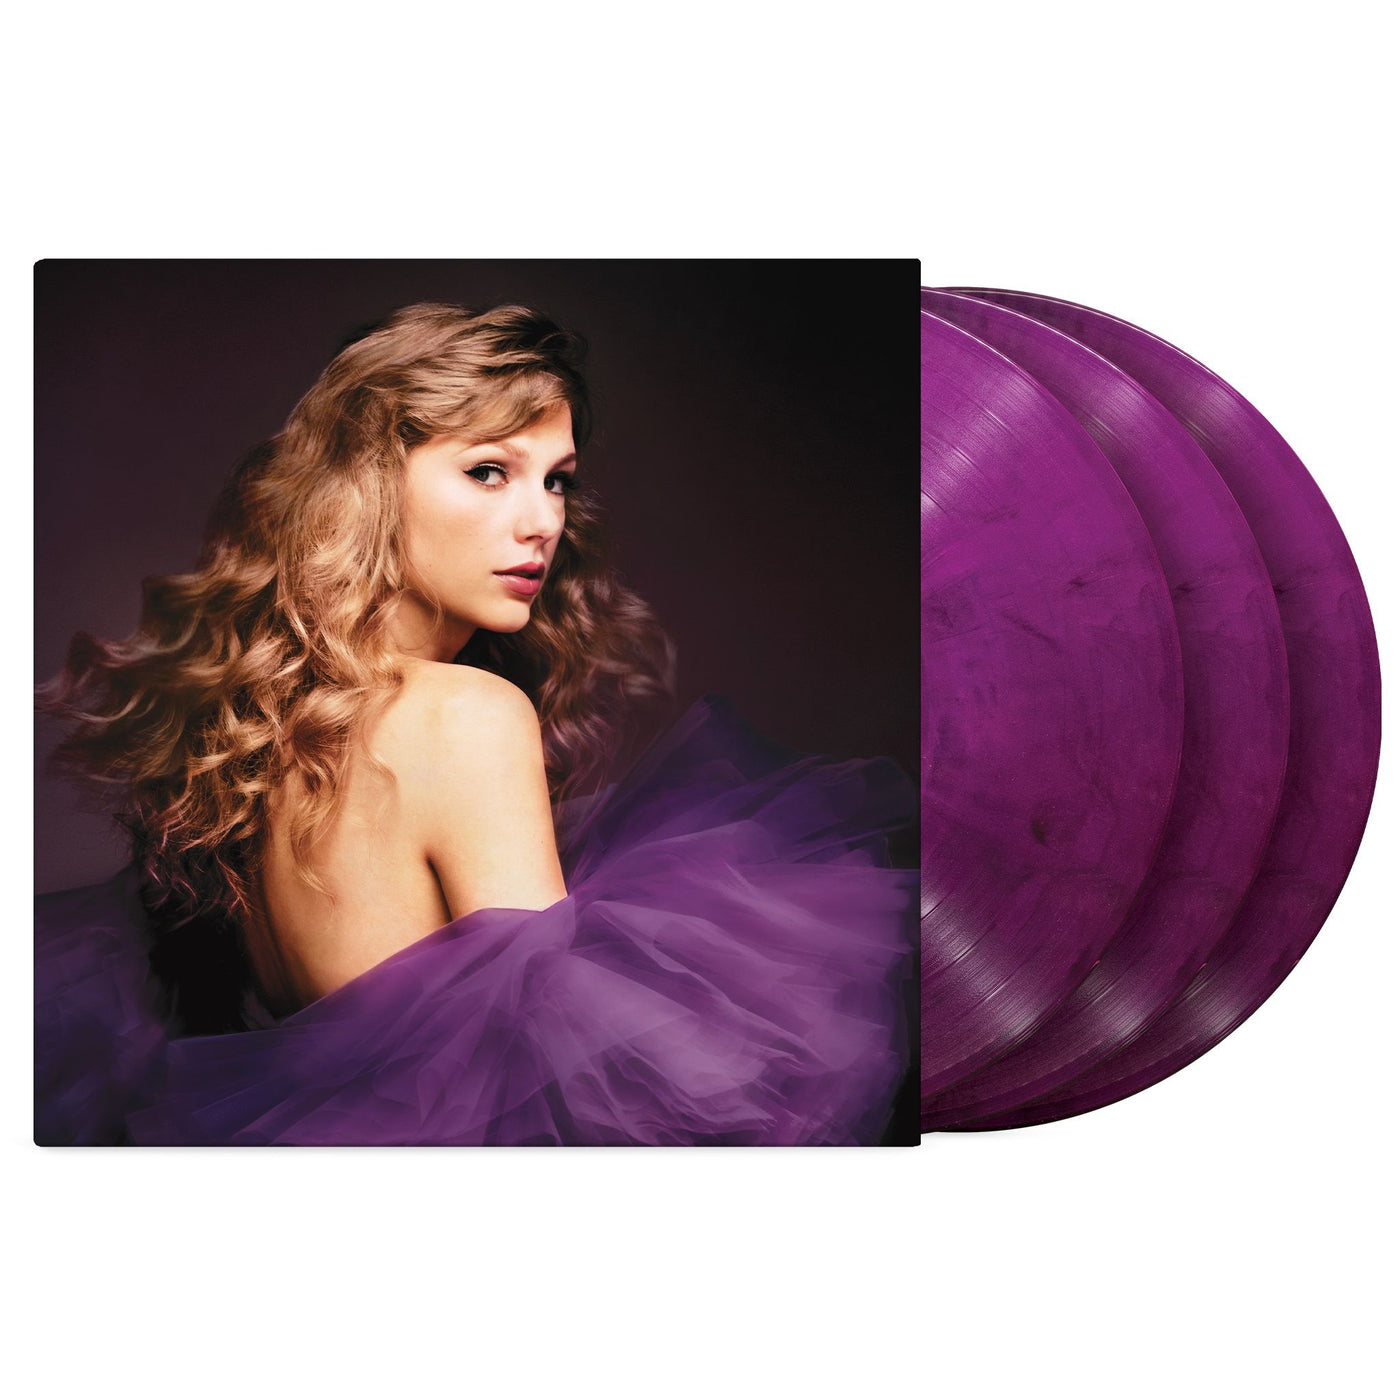 NEW/SEALED! Taylor Swift - Speak Now (Taylor's Version) (Orchid Marbled Colored Vinyl) (3 Lp's)